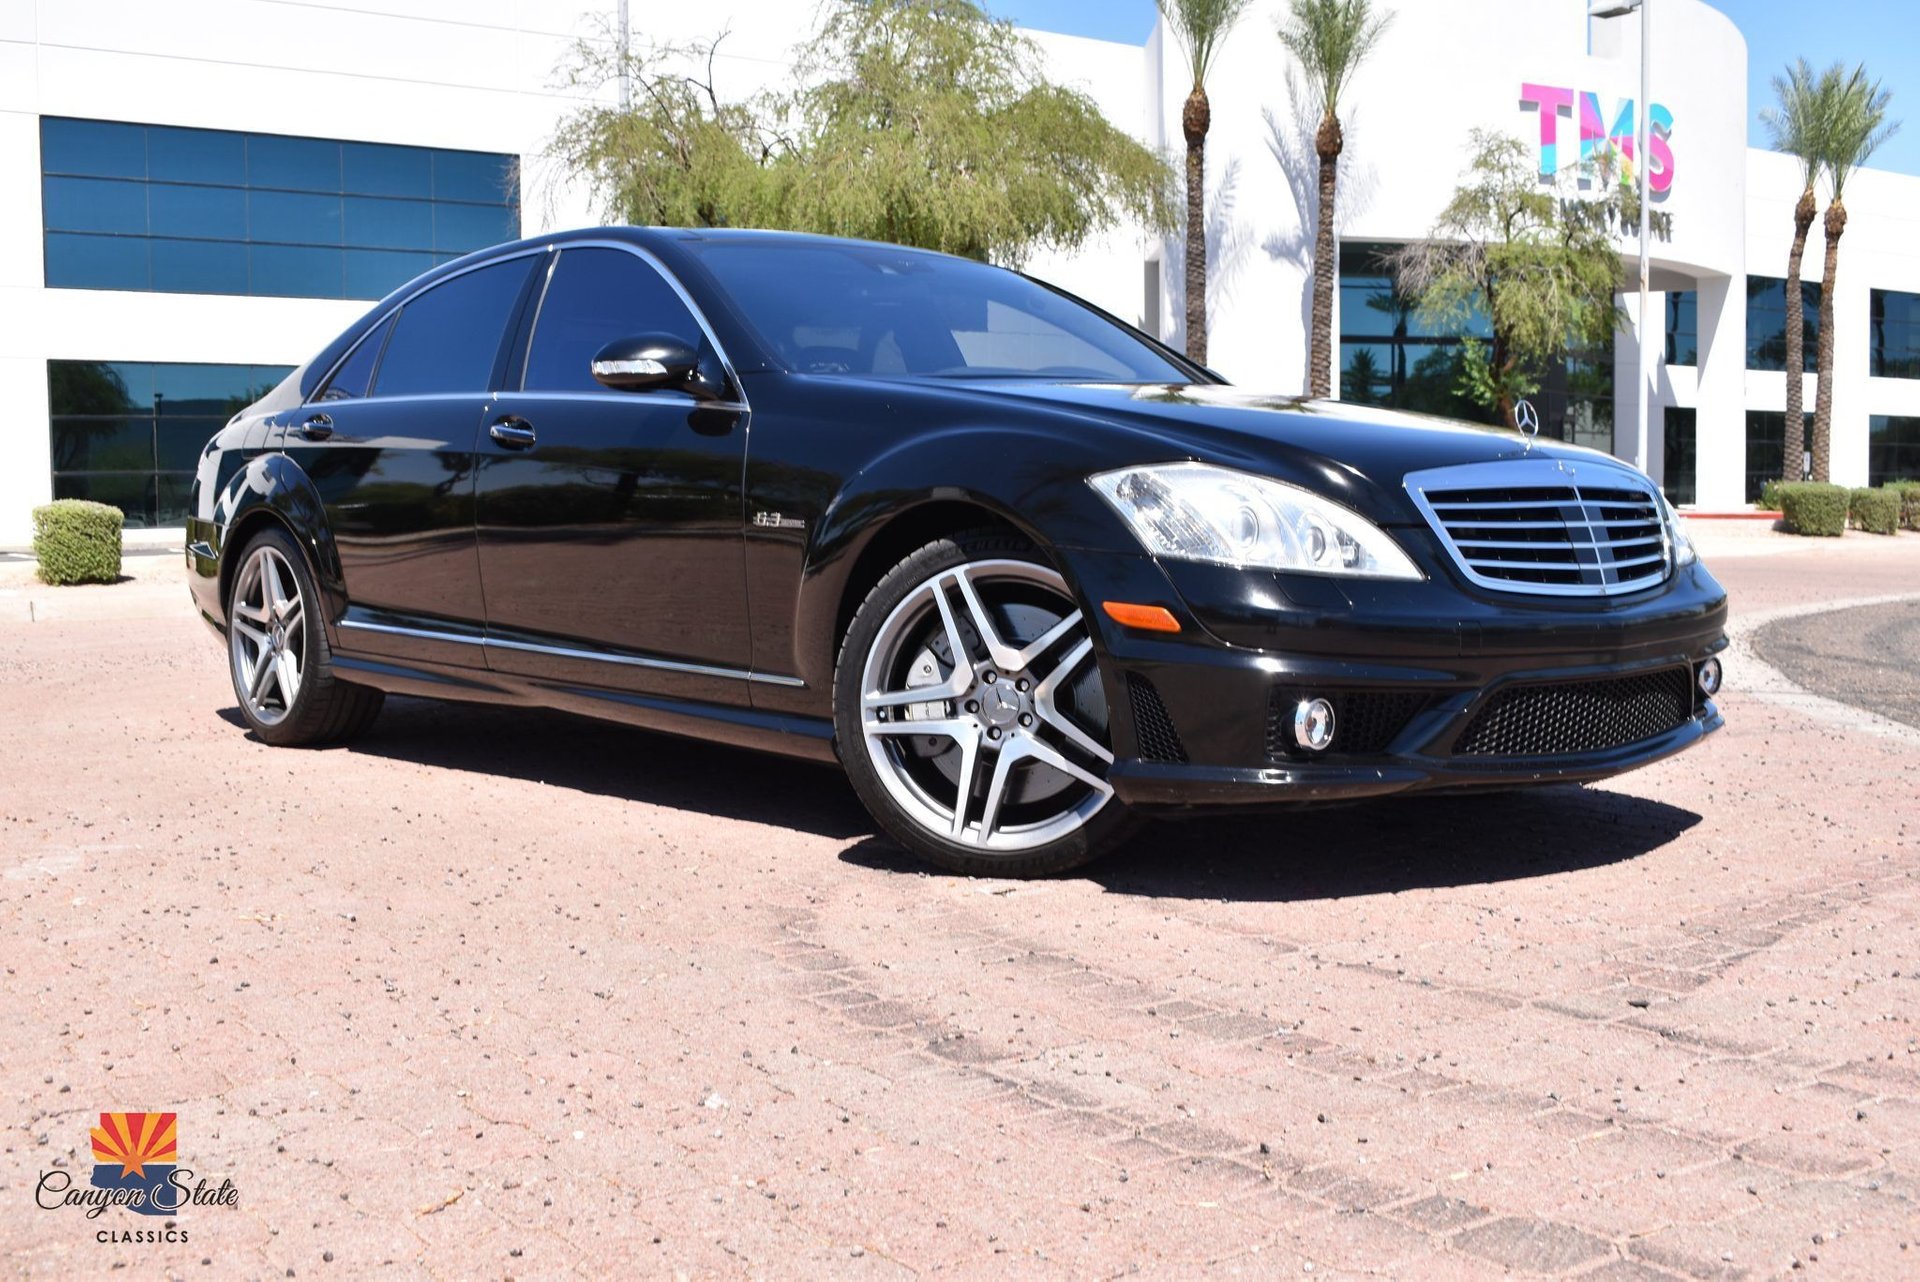 2008 Mercedes-Benz S-Class | Canyon State Classics